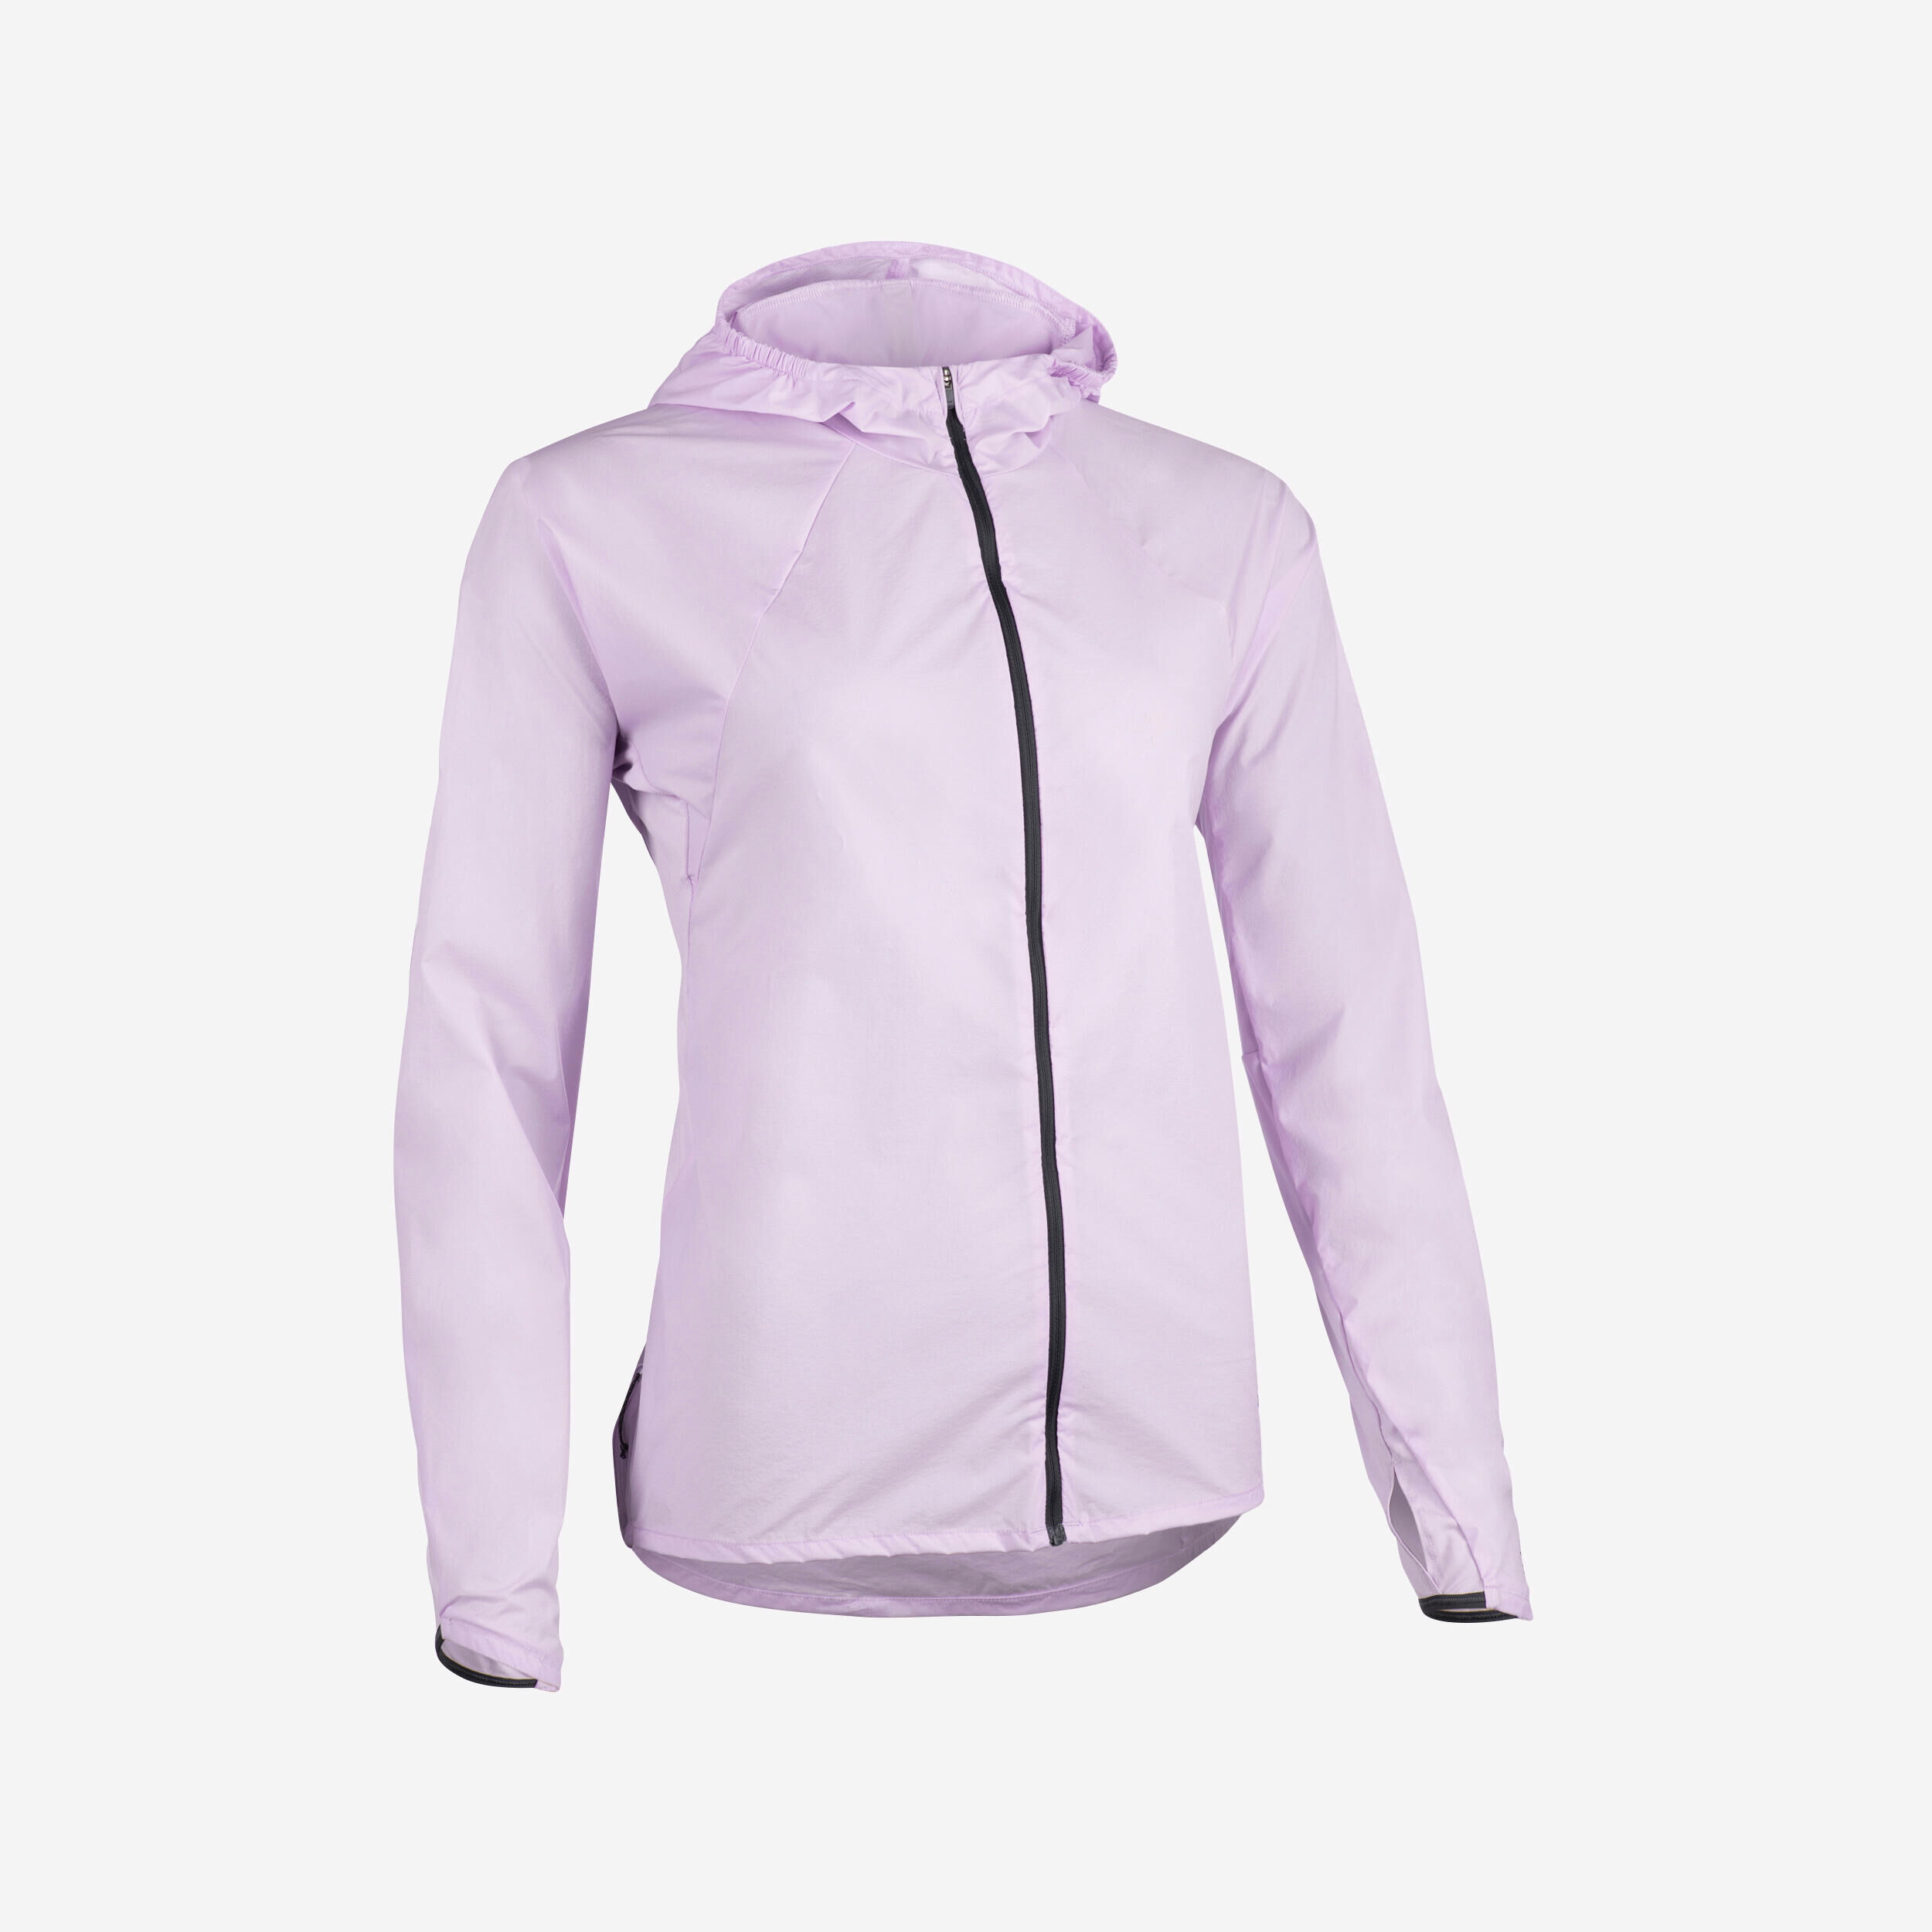 EVADICT WOMEN'S TRAIL RUNNING LONG-SLEEVED WINDPROOF JACKET - LILAC